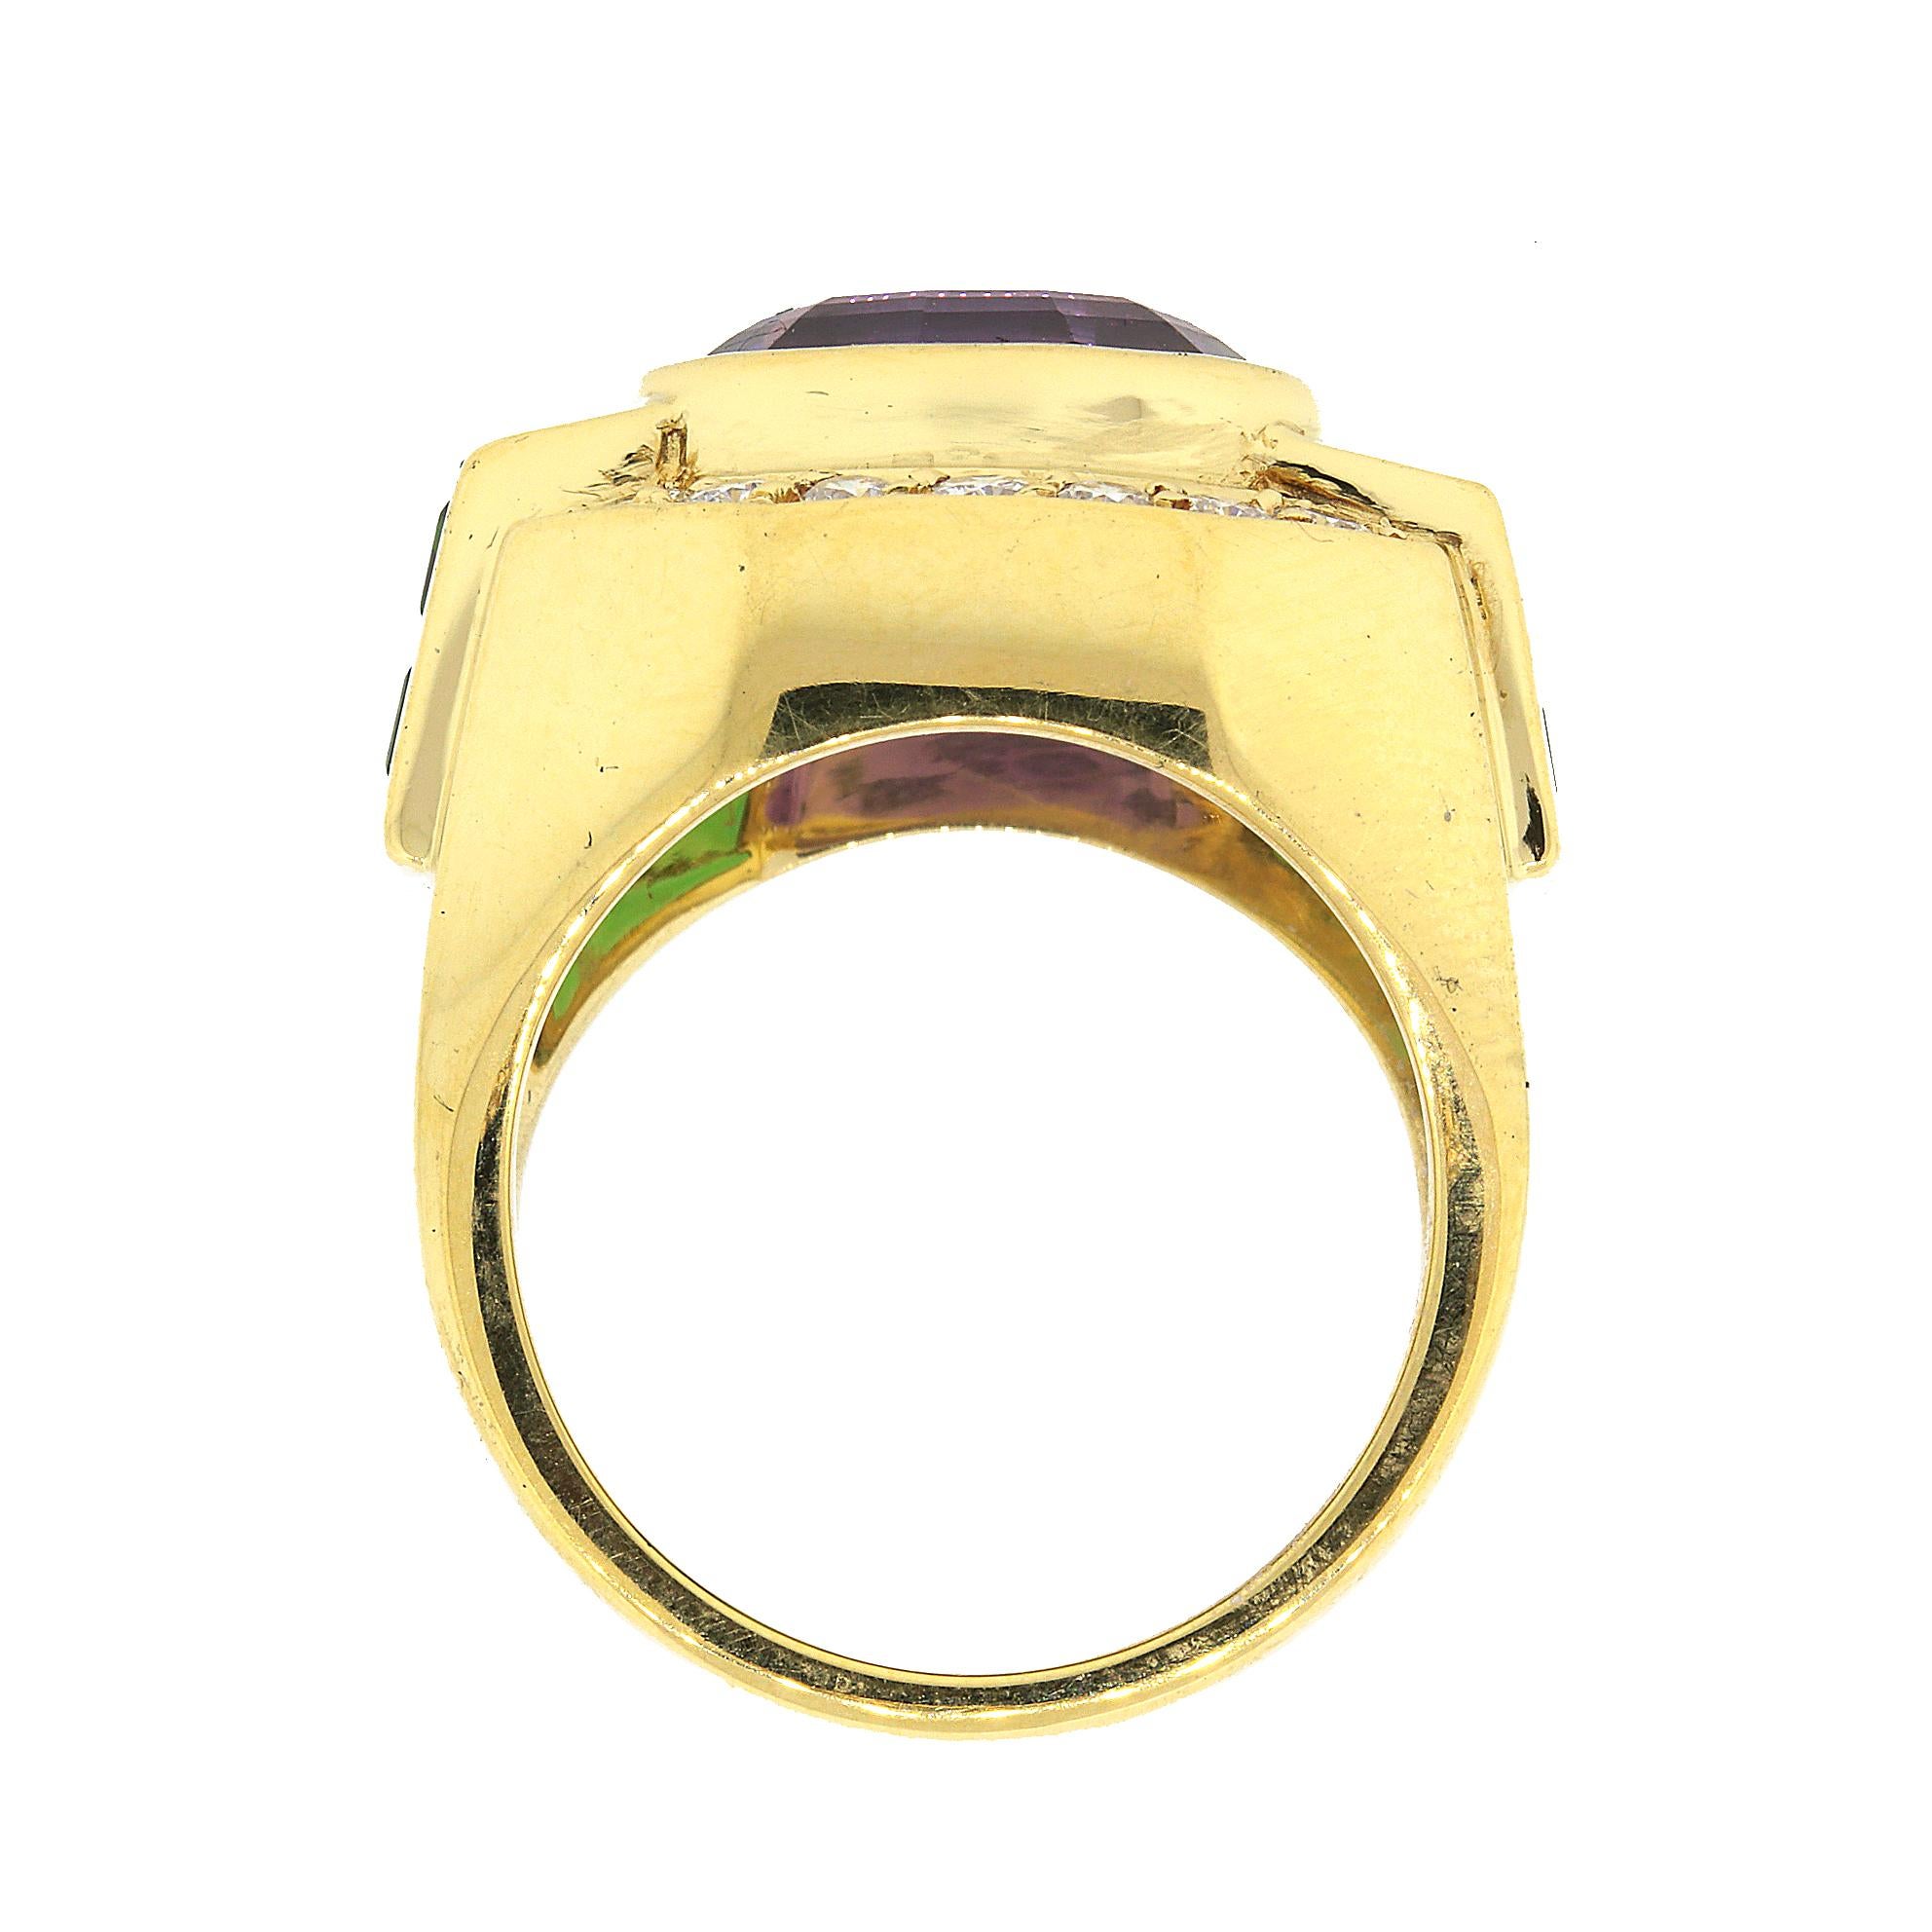 18 kt Yellow Gold
Total Weight: 16 grams
Diamond: 0.35 ct twd
Ring Size: 7